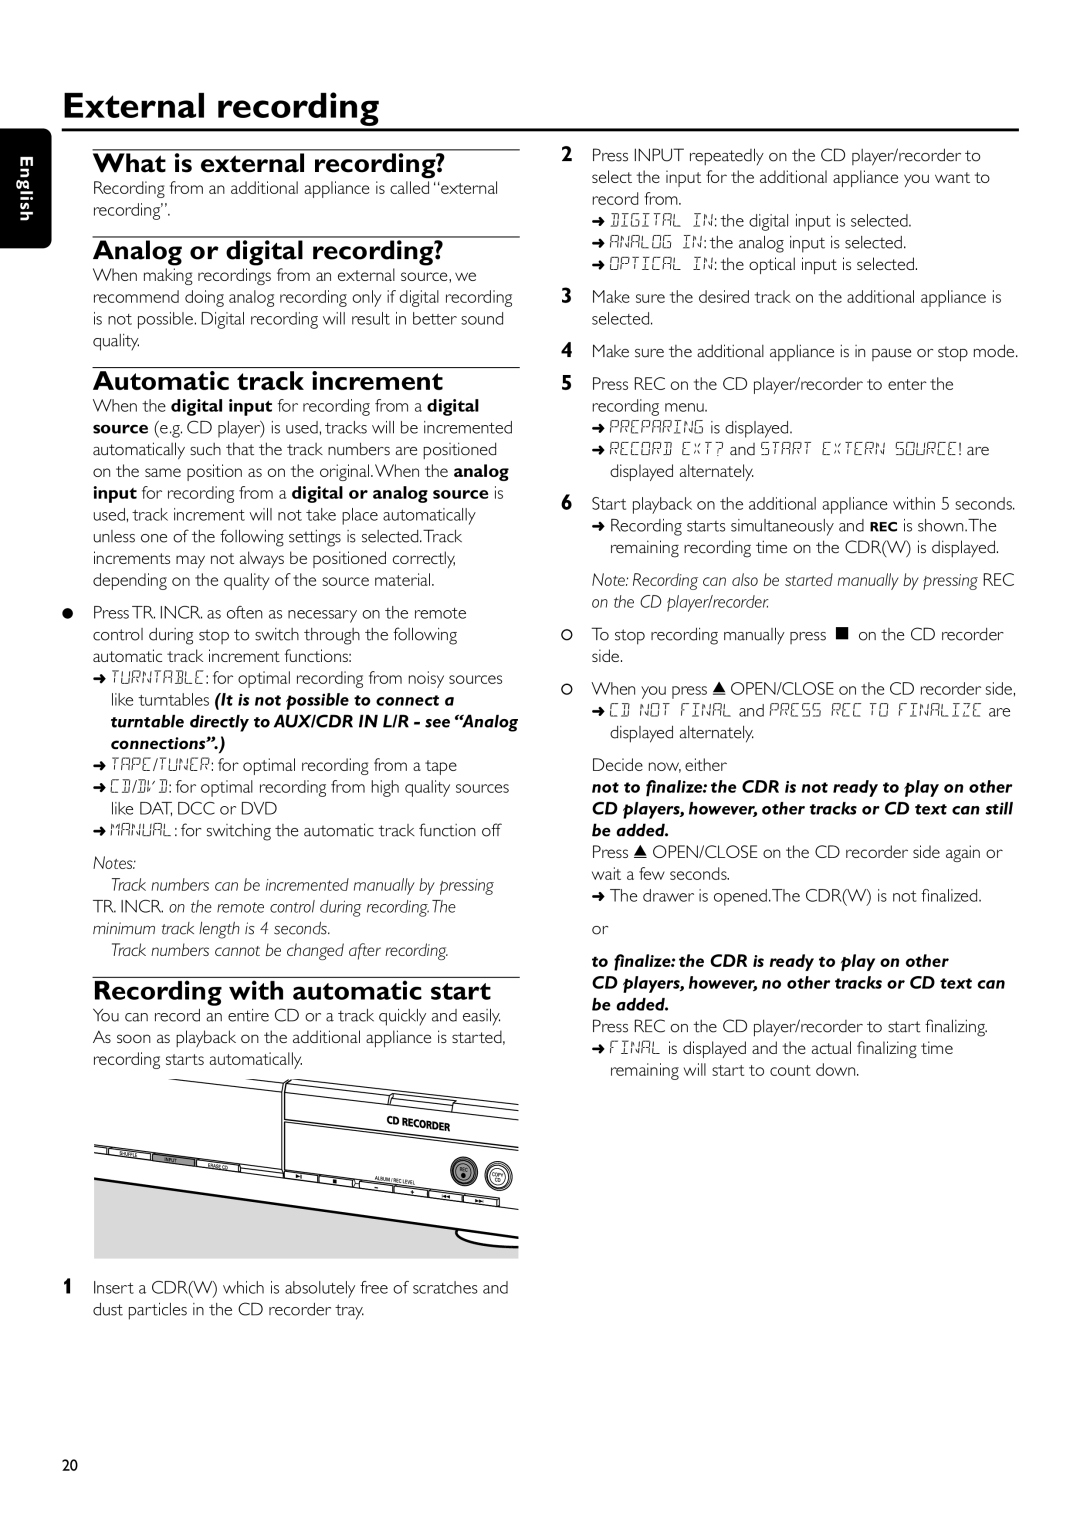 Philips CDR-795 External recording, What is external recording?, Analog or digital recording?, Automatic track increment 